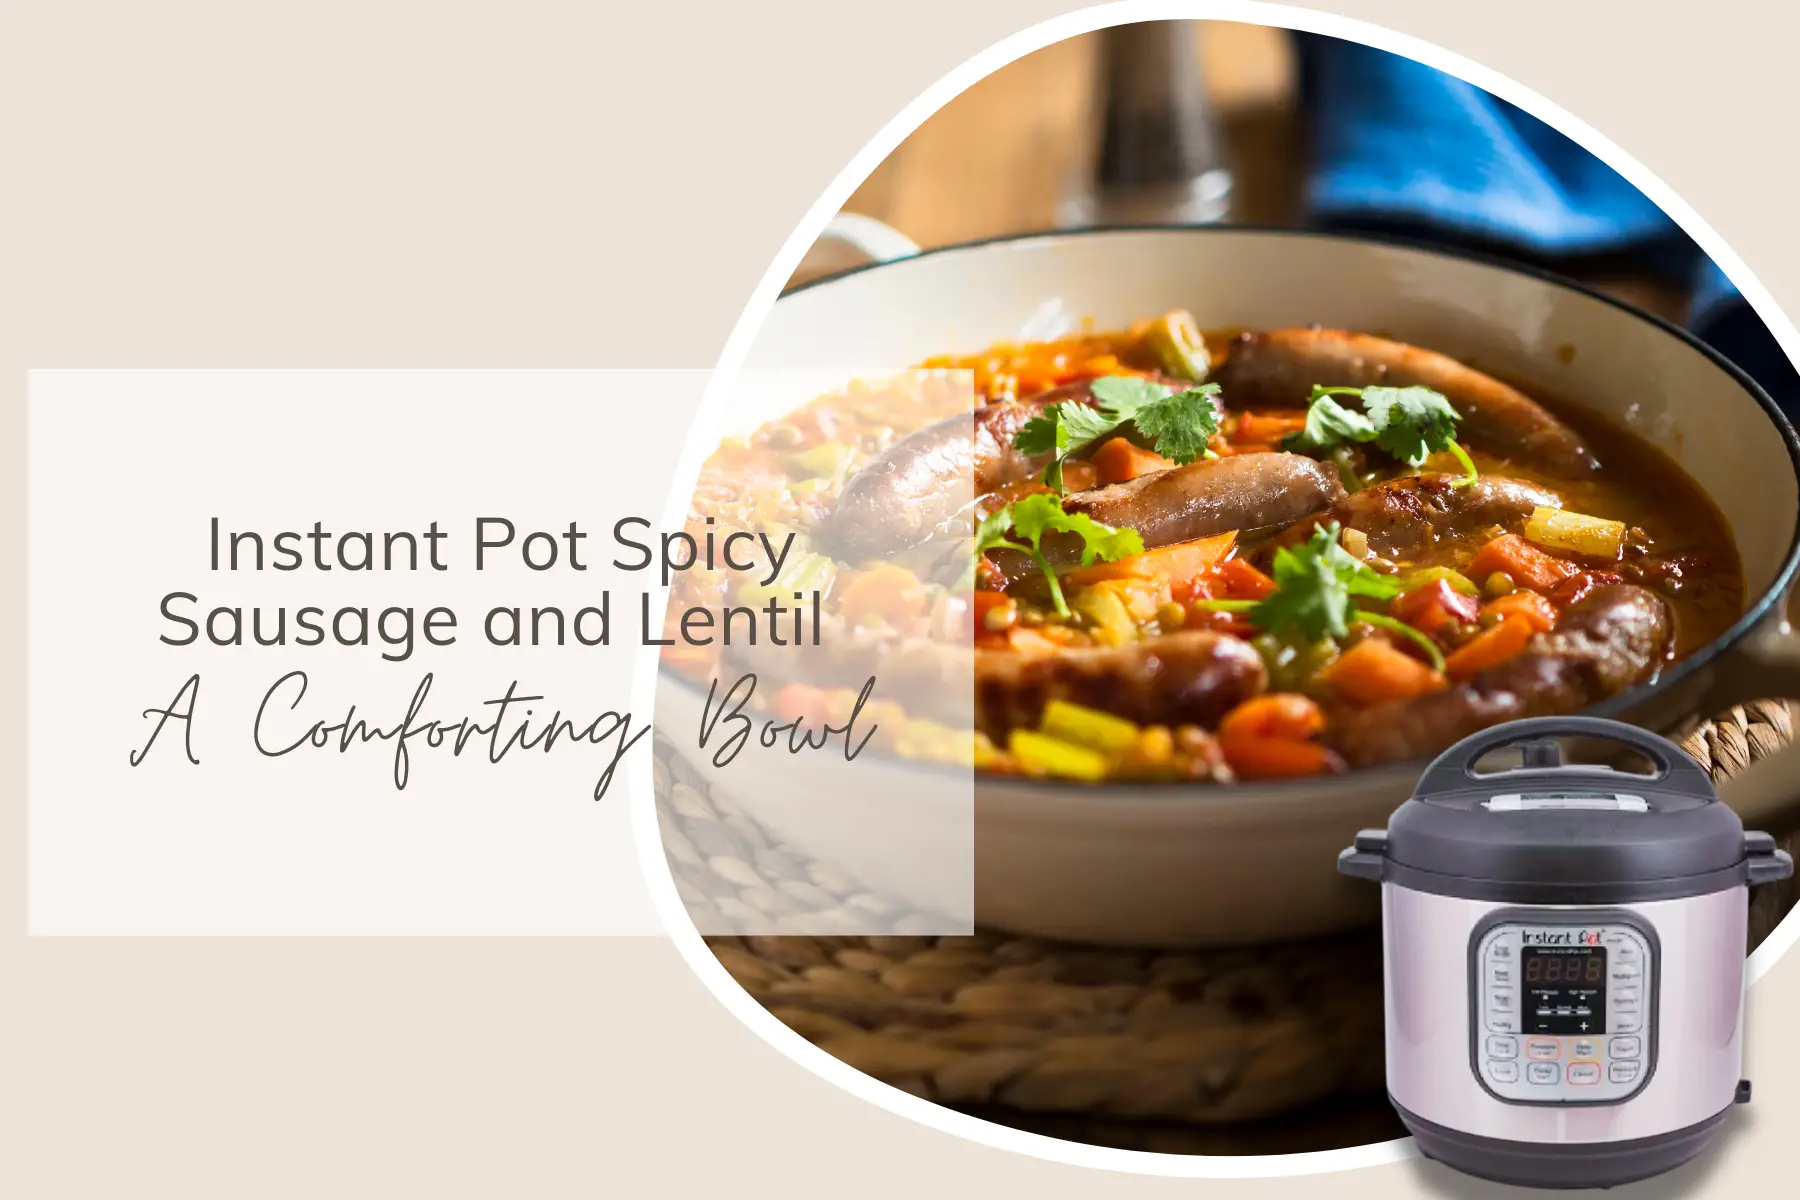 Instant Pot Spicy Sausage and Lentil - A Comforting Bowl